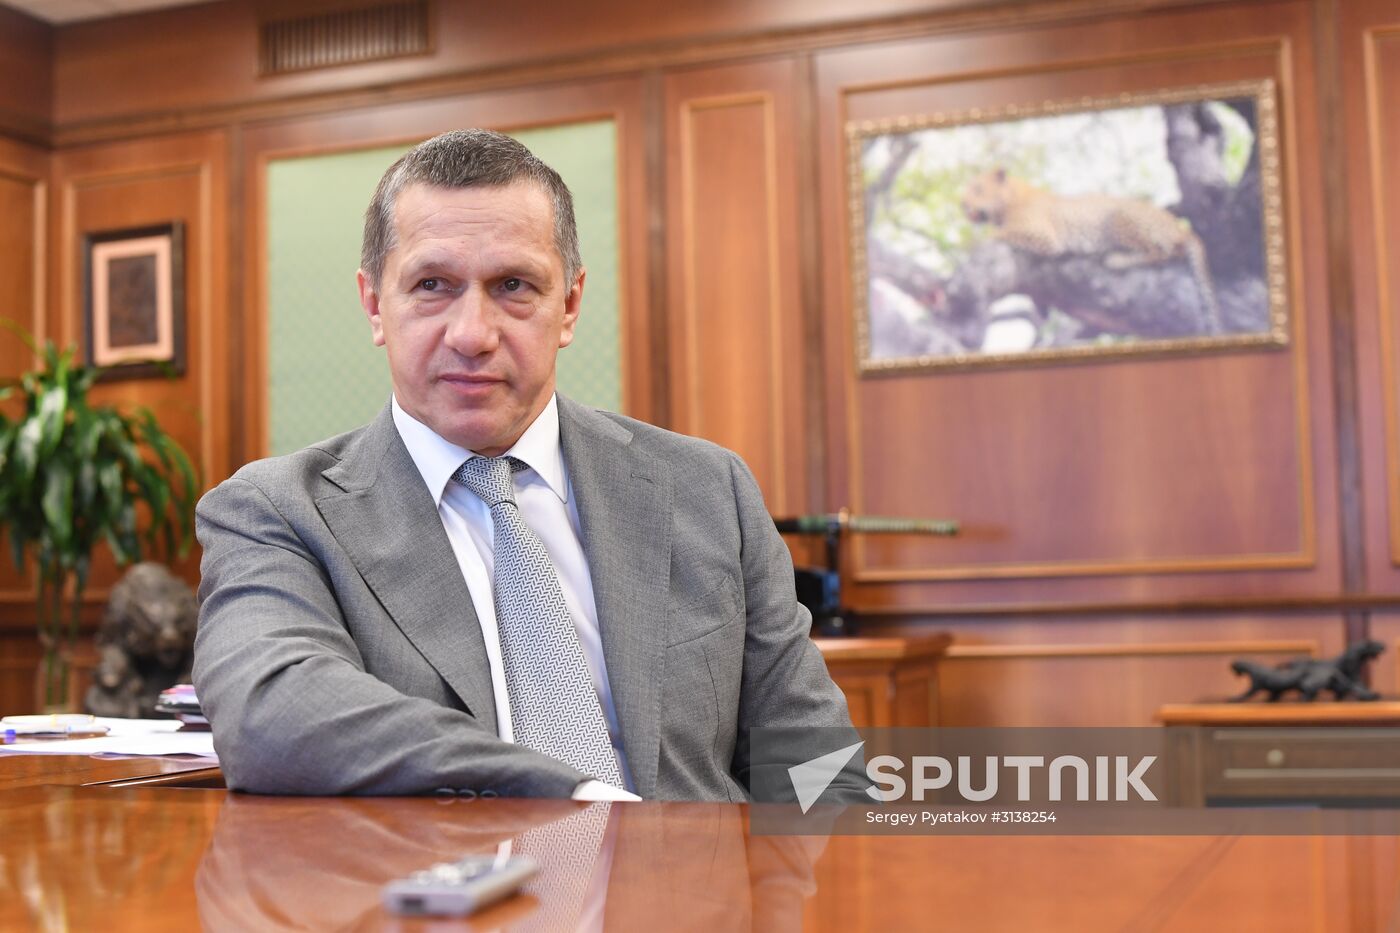 Interview with Deputy Prime Minister Yury Trutnev